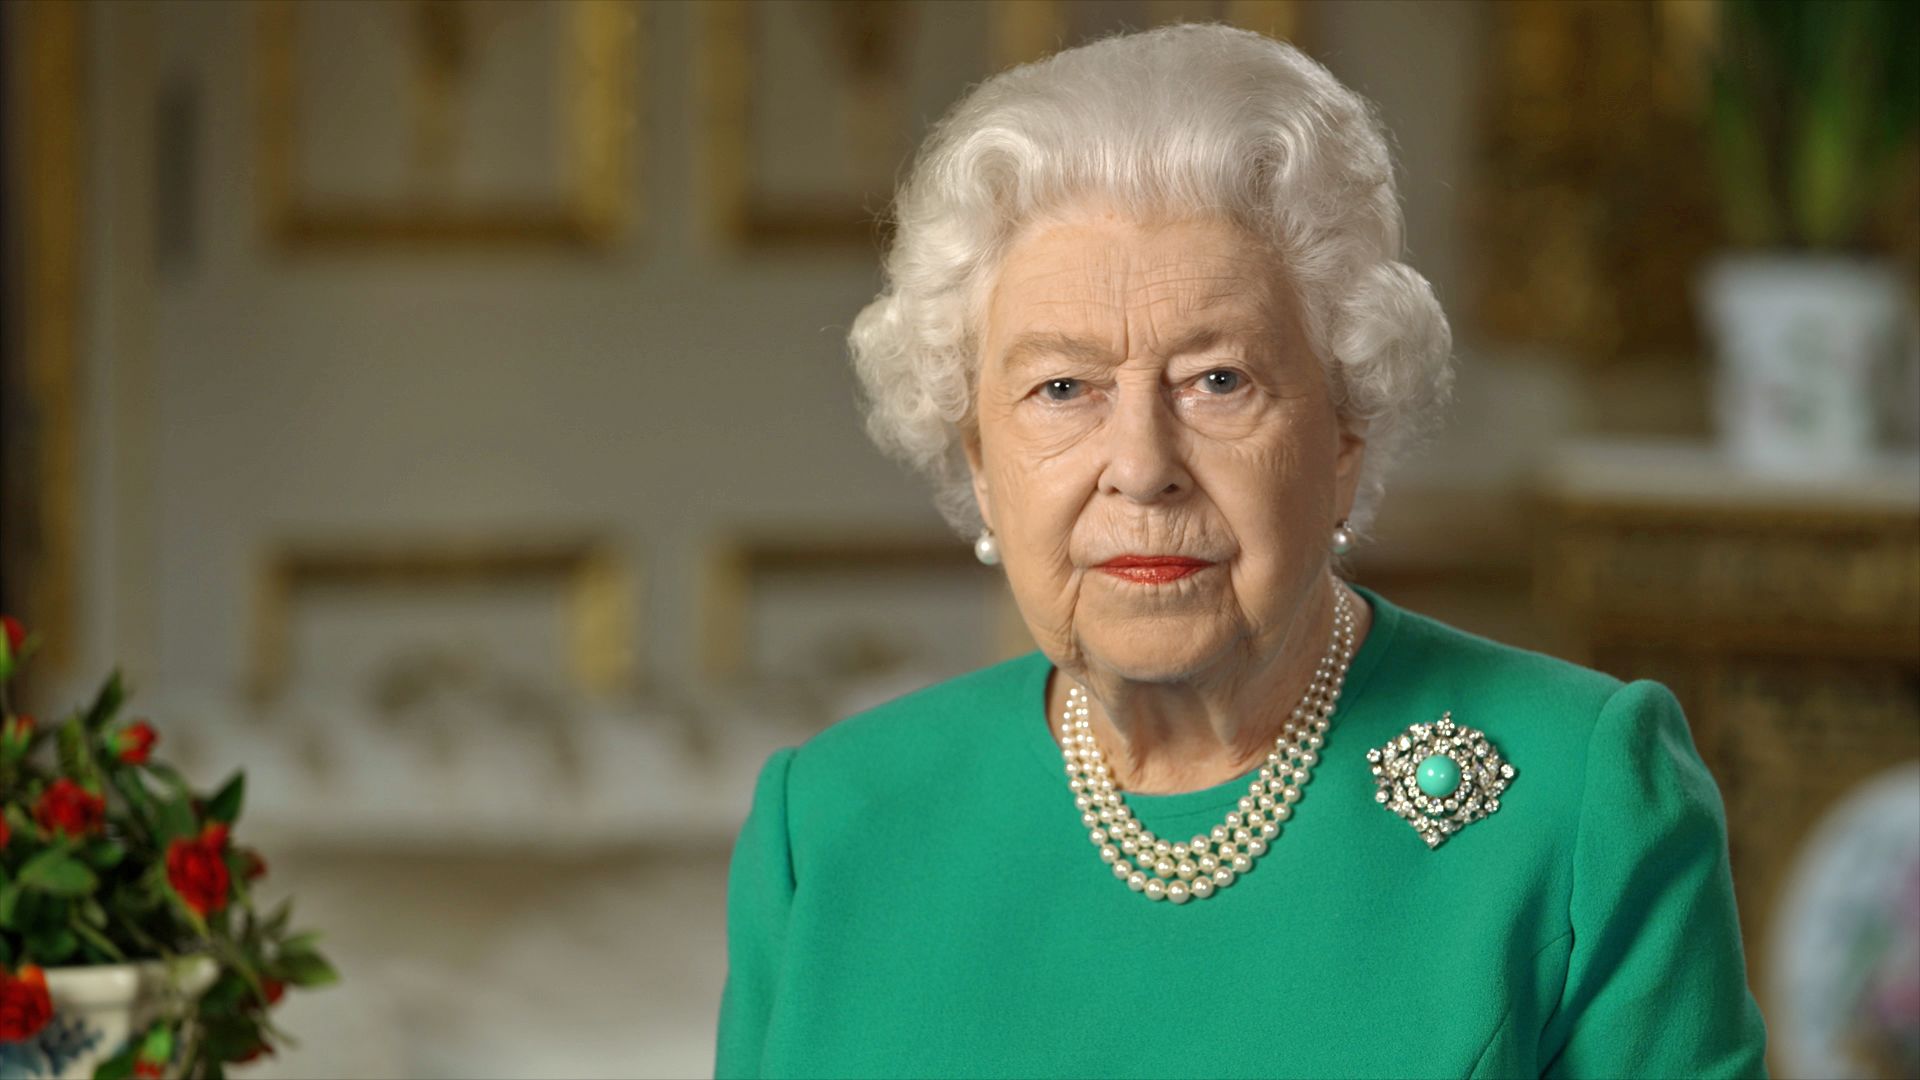 The Subtle Message Queen Elizabeth Sent By Wearing an Unusual Brooch During Her Televised Address